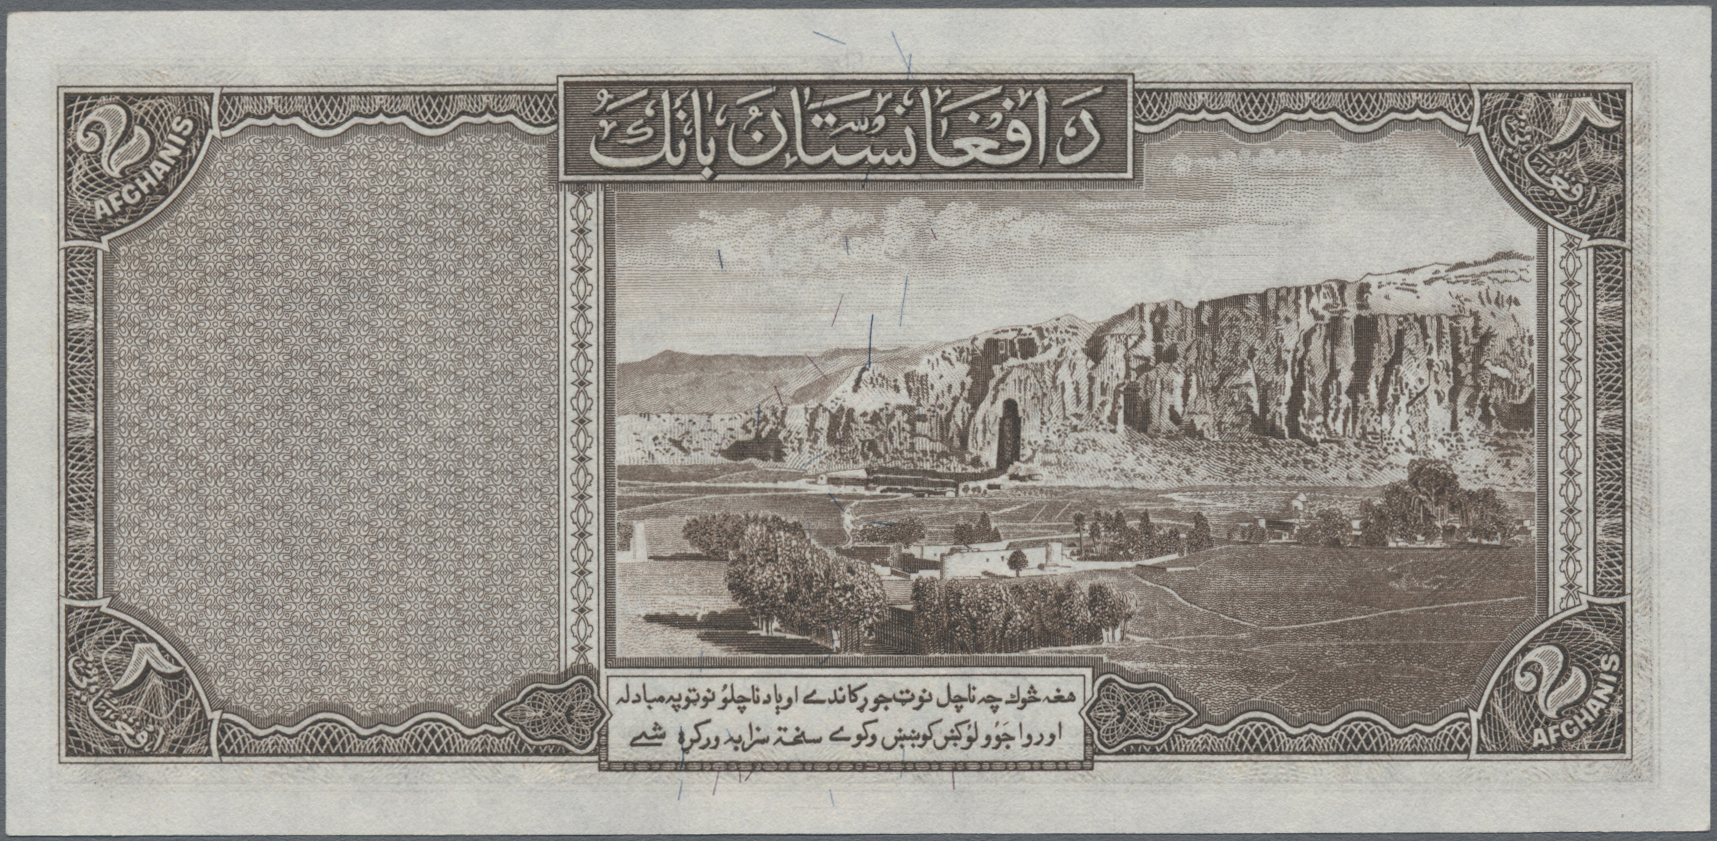 Lot 00003 - Afghanistan | Banknoten  -  Auktionshaus Christoph Gärtner GmbH & Co. KG 55th AUCTION - Day 1